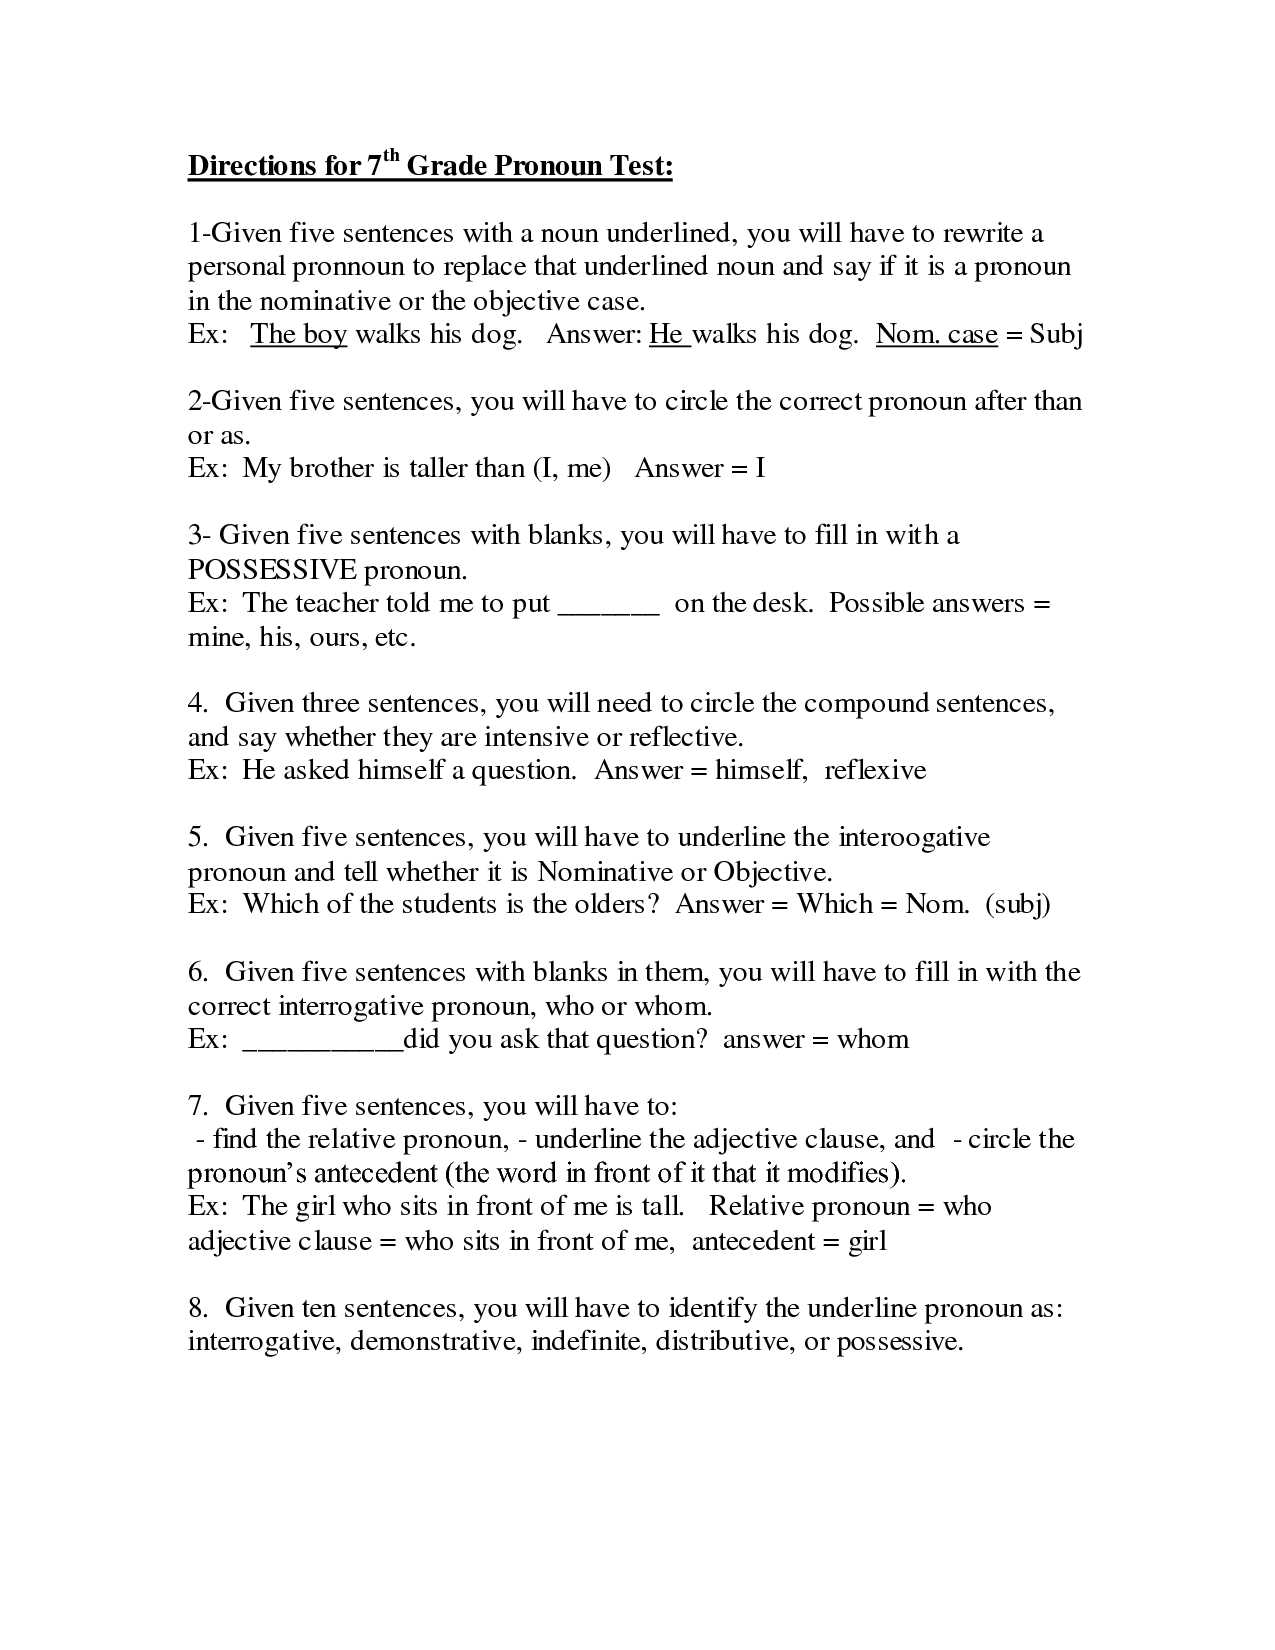 Forces Worksheet 1 Answer Key or Primary School Worksheets Beautiful 7th Grade English Worksheets